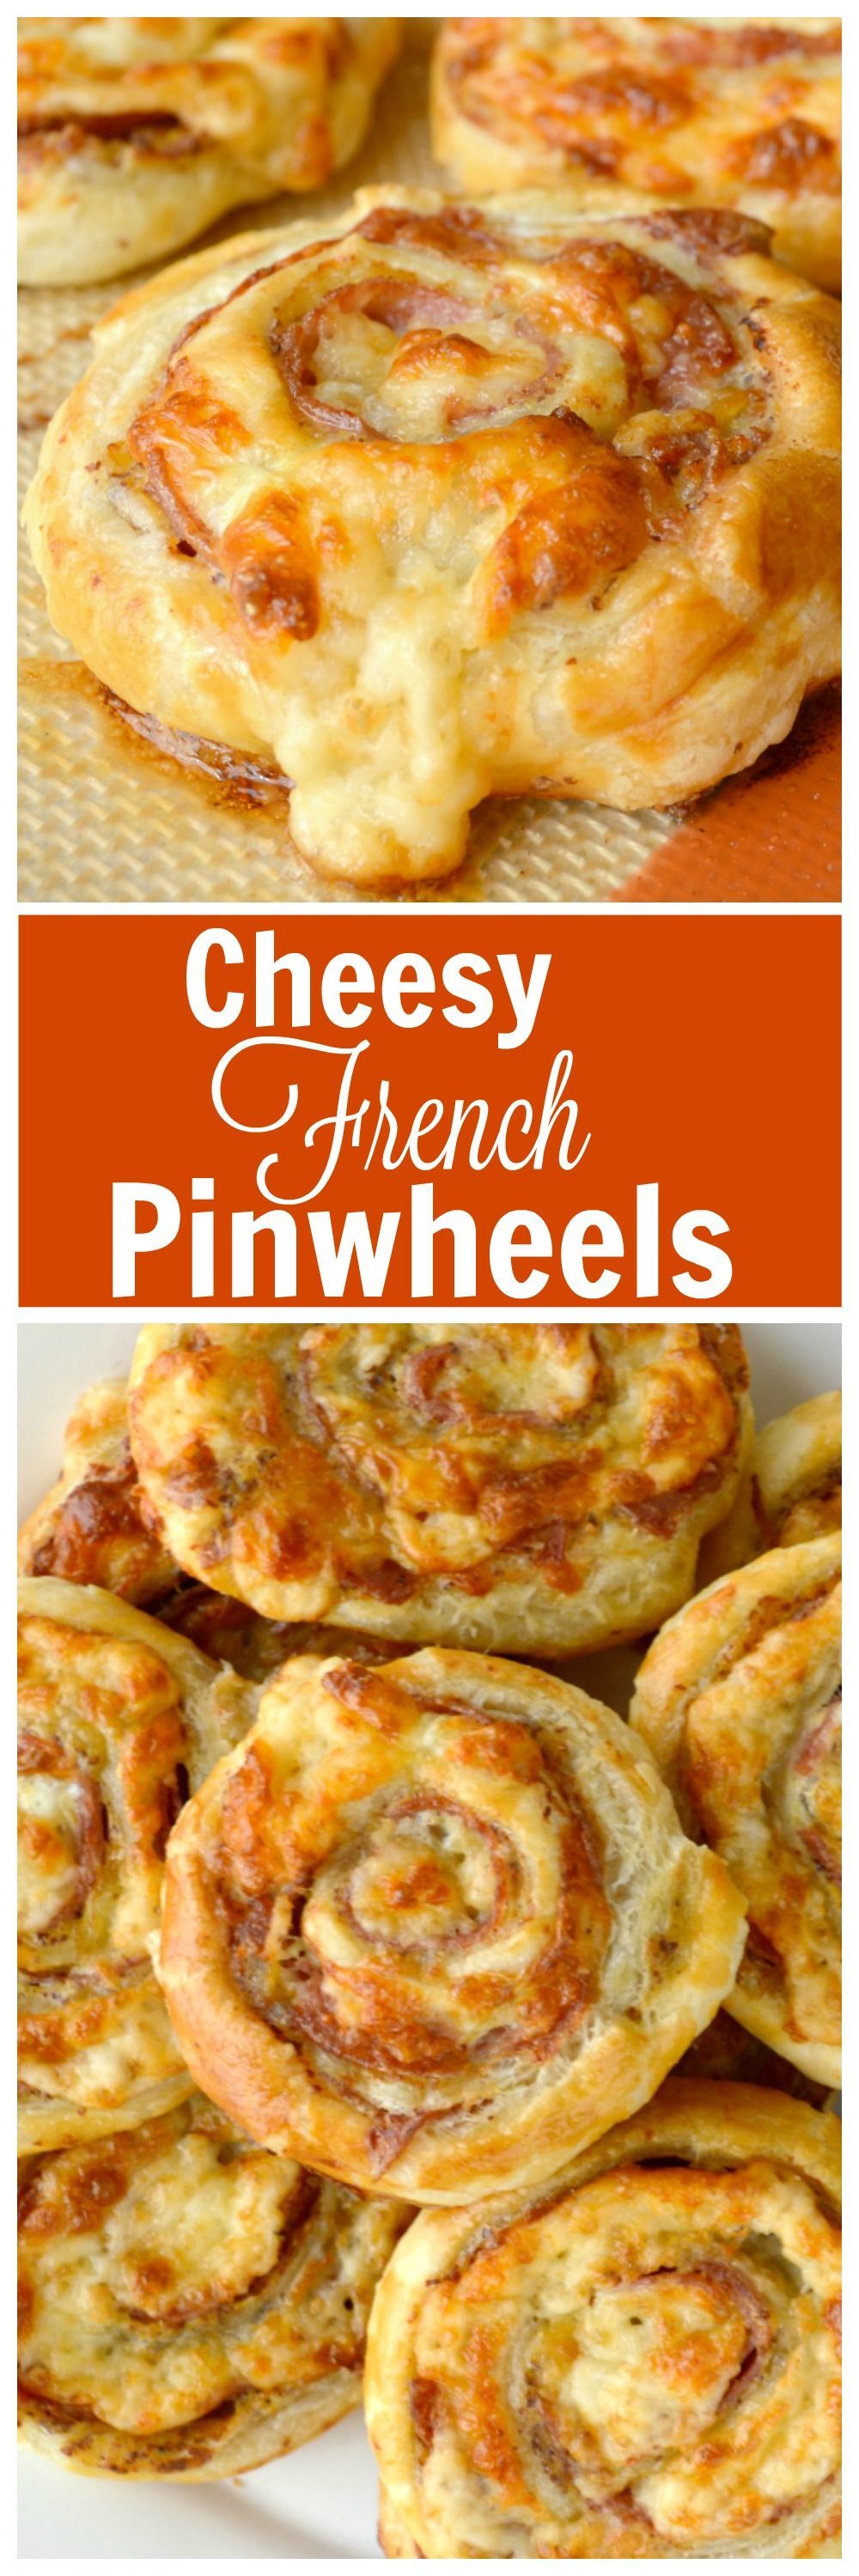 Cheesy French Pinwheels. A super easy appetizer that starts with store bought puff pastry. These are delic